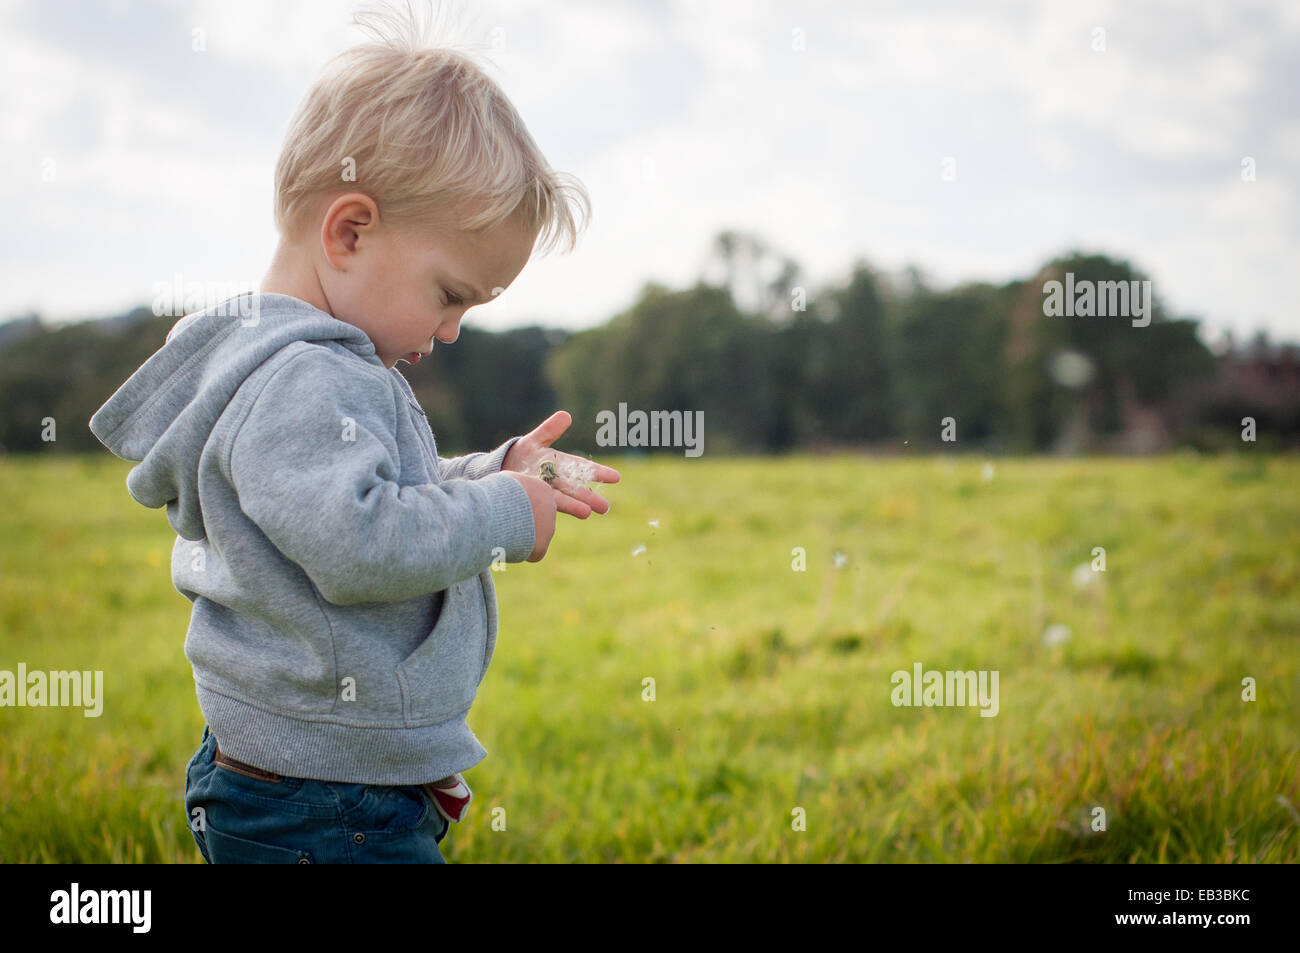 Boy standing in a field Banque D'Images